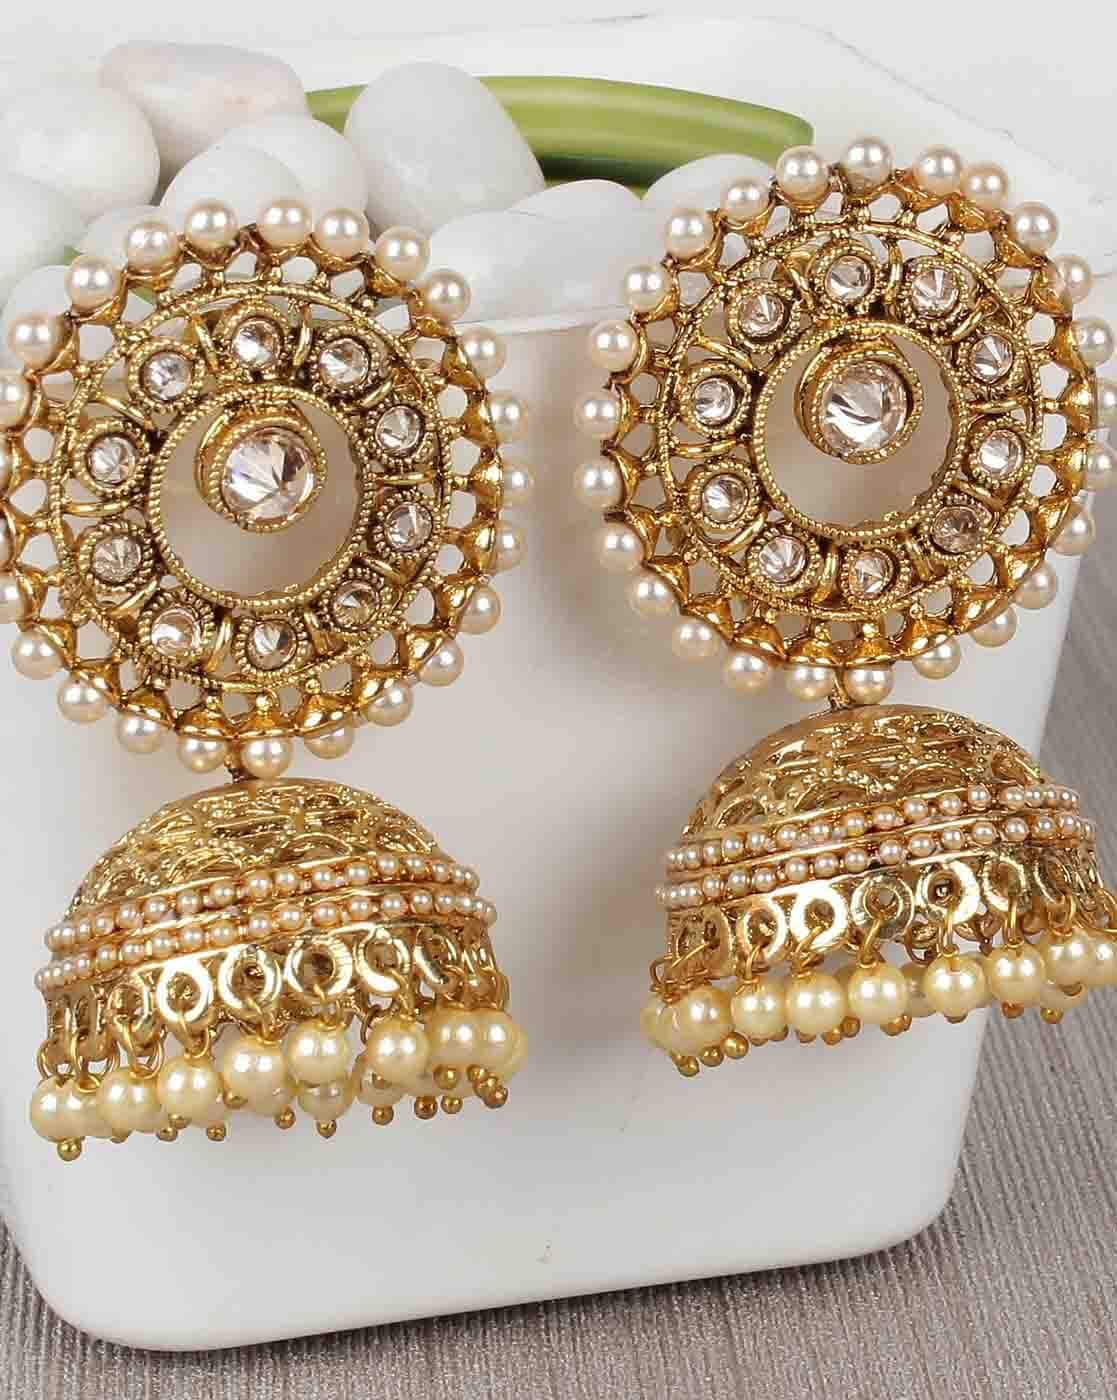 Pearl Jhumkas Gold Jumkas South Indian Jumkis Indian Jewellery  Gold  jewelry for sale Wholesale sterling silver jewelry Silver necklaces women